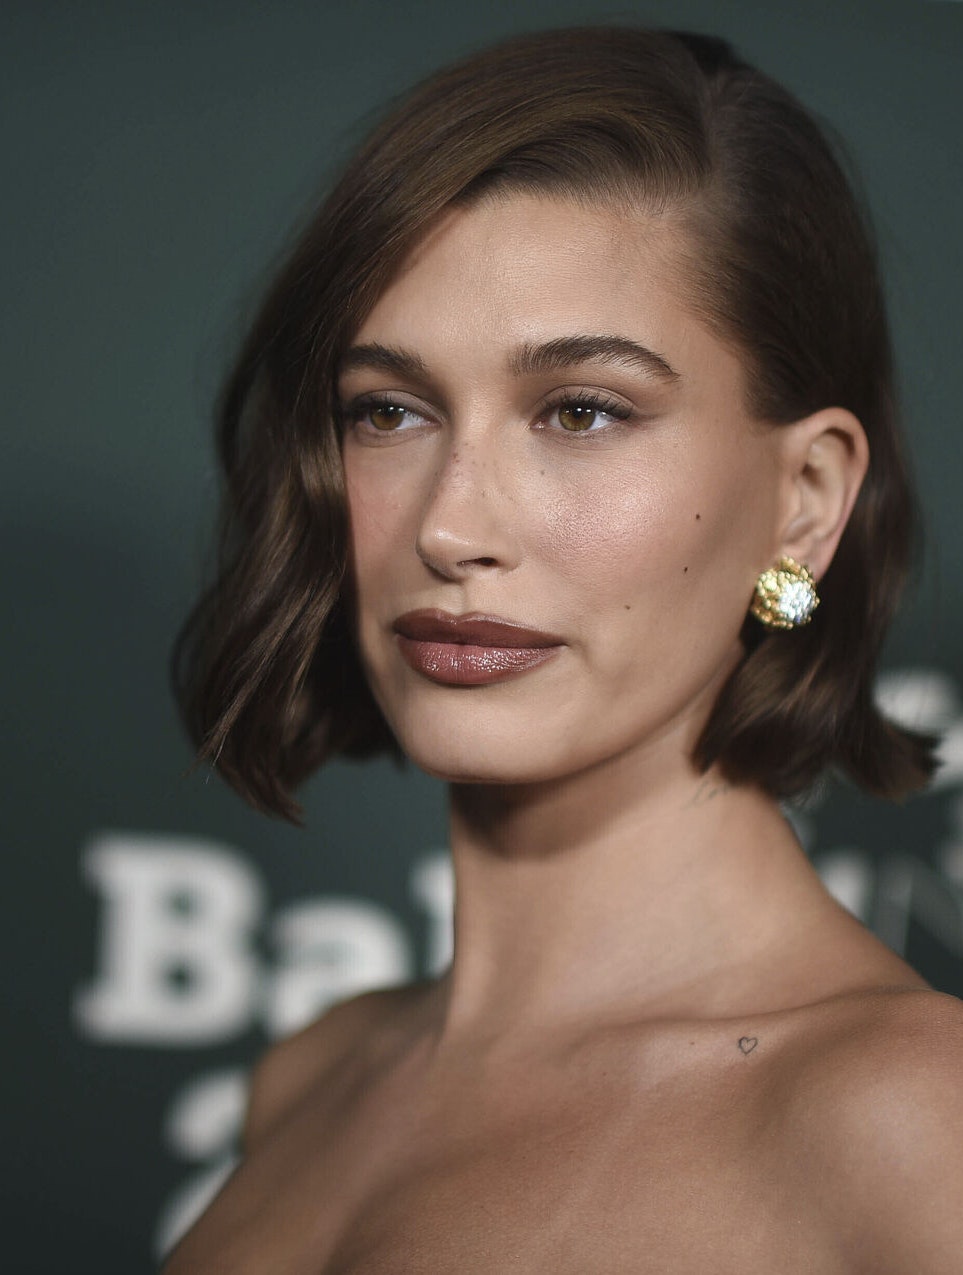 Hailey Bieber arrives at the Baby2Baby Gala on Saturday, Nov. 11, 2023, at the Pacific Design Center in West Hollywood, Calif. (Photo by Richard Shotwell/Invision/AP)